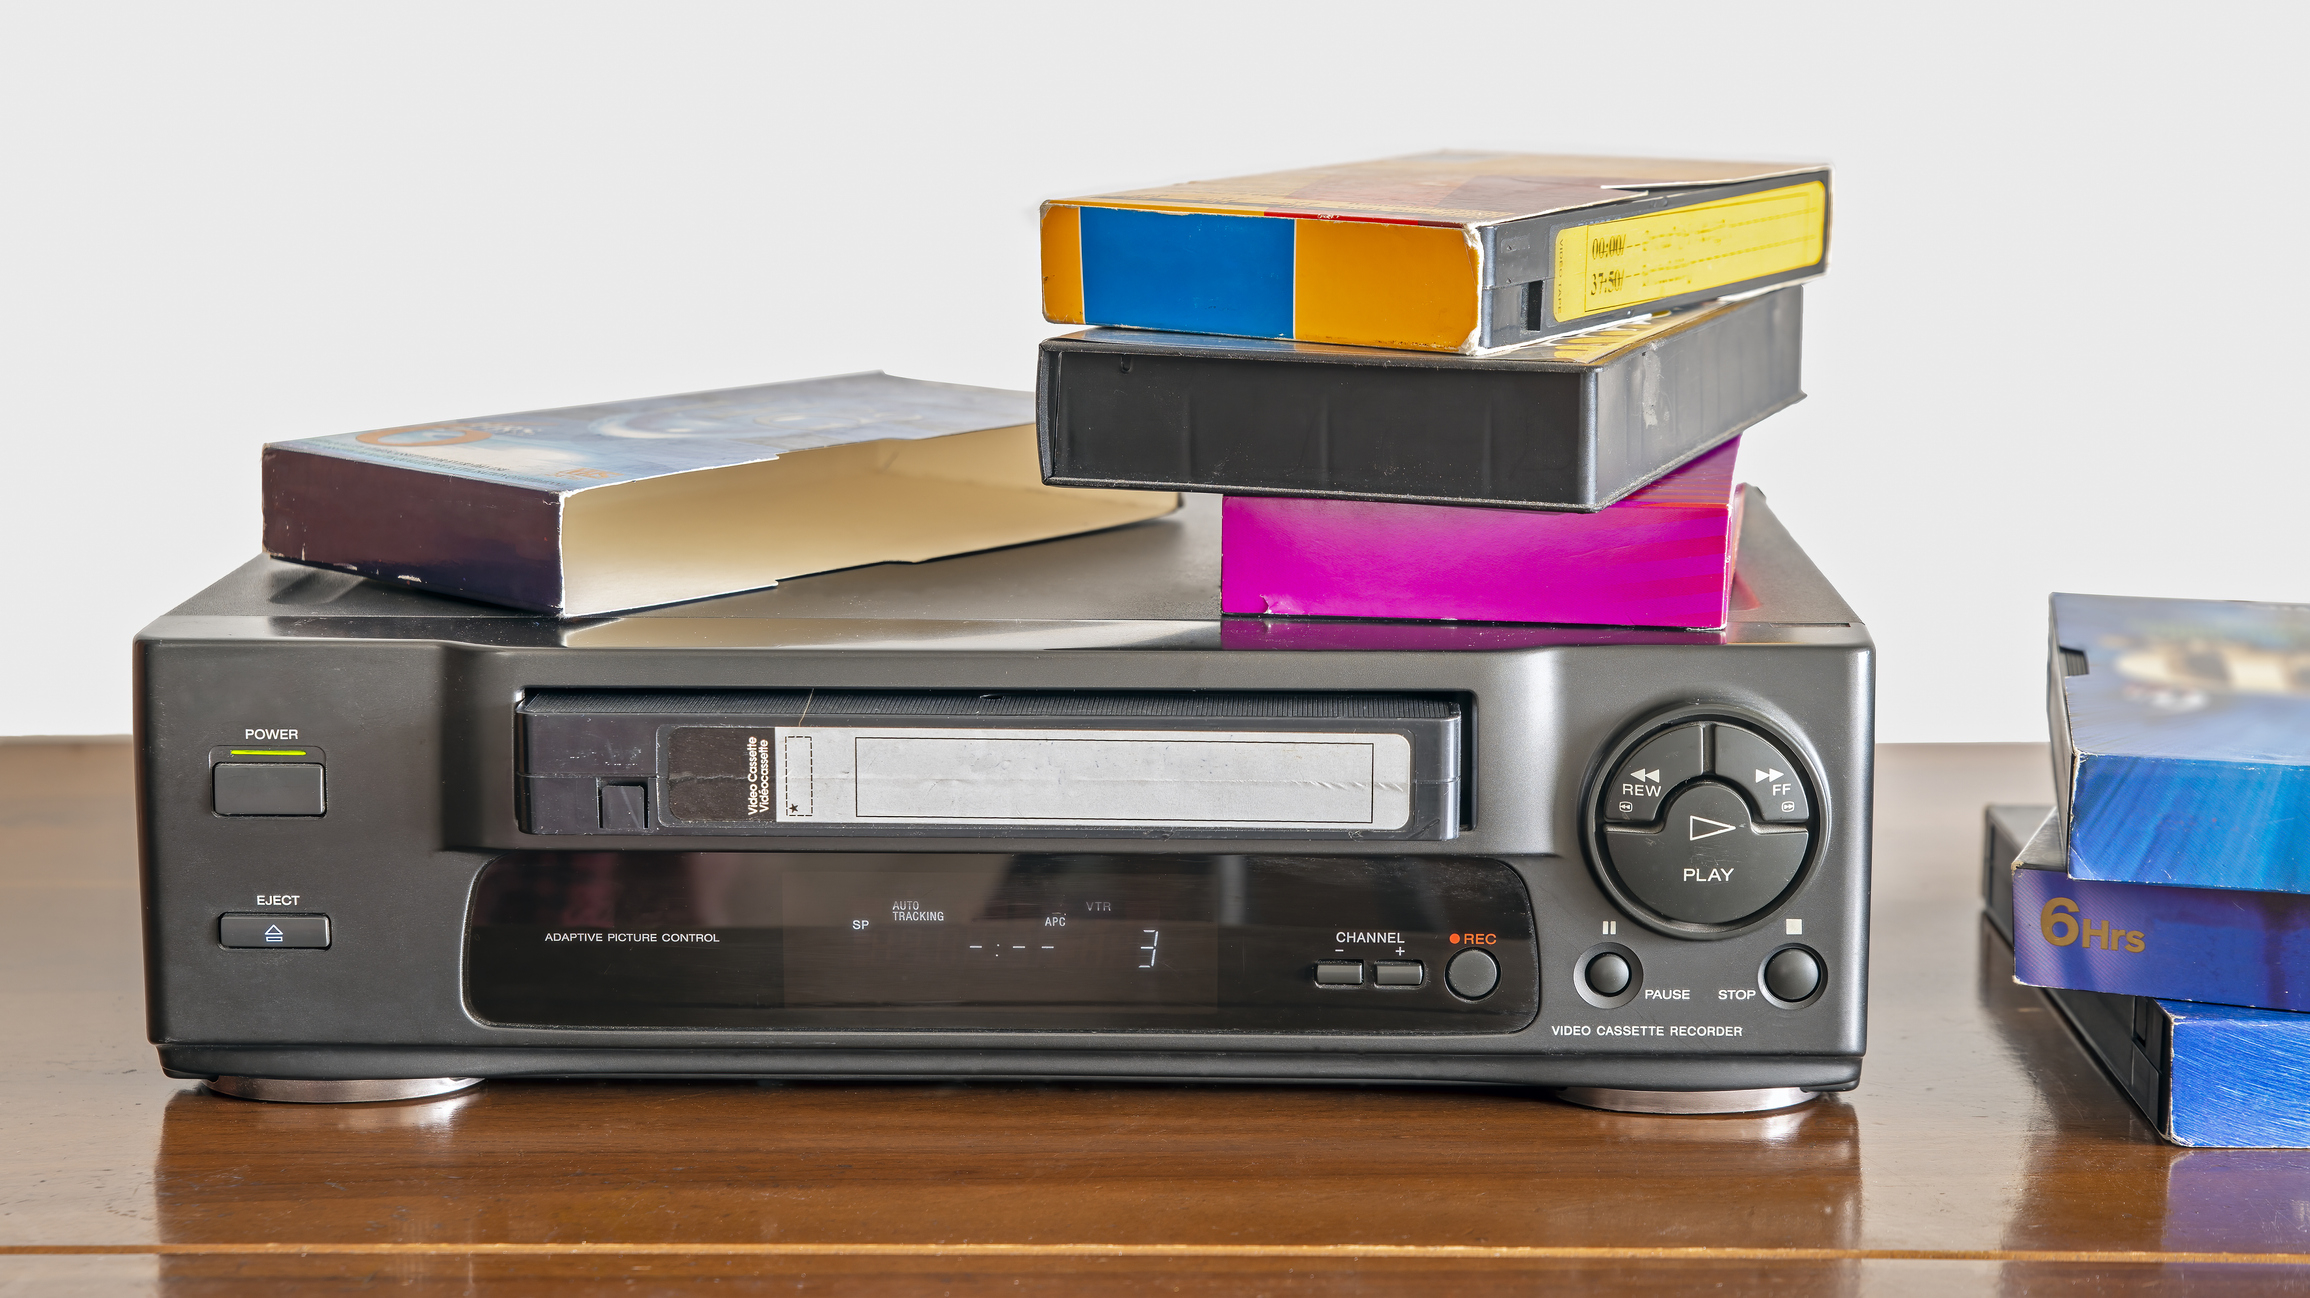 Pile of VHS tapes on top of a VCR with more tapes beside it on a wooden surface